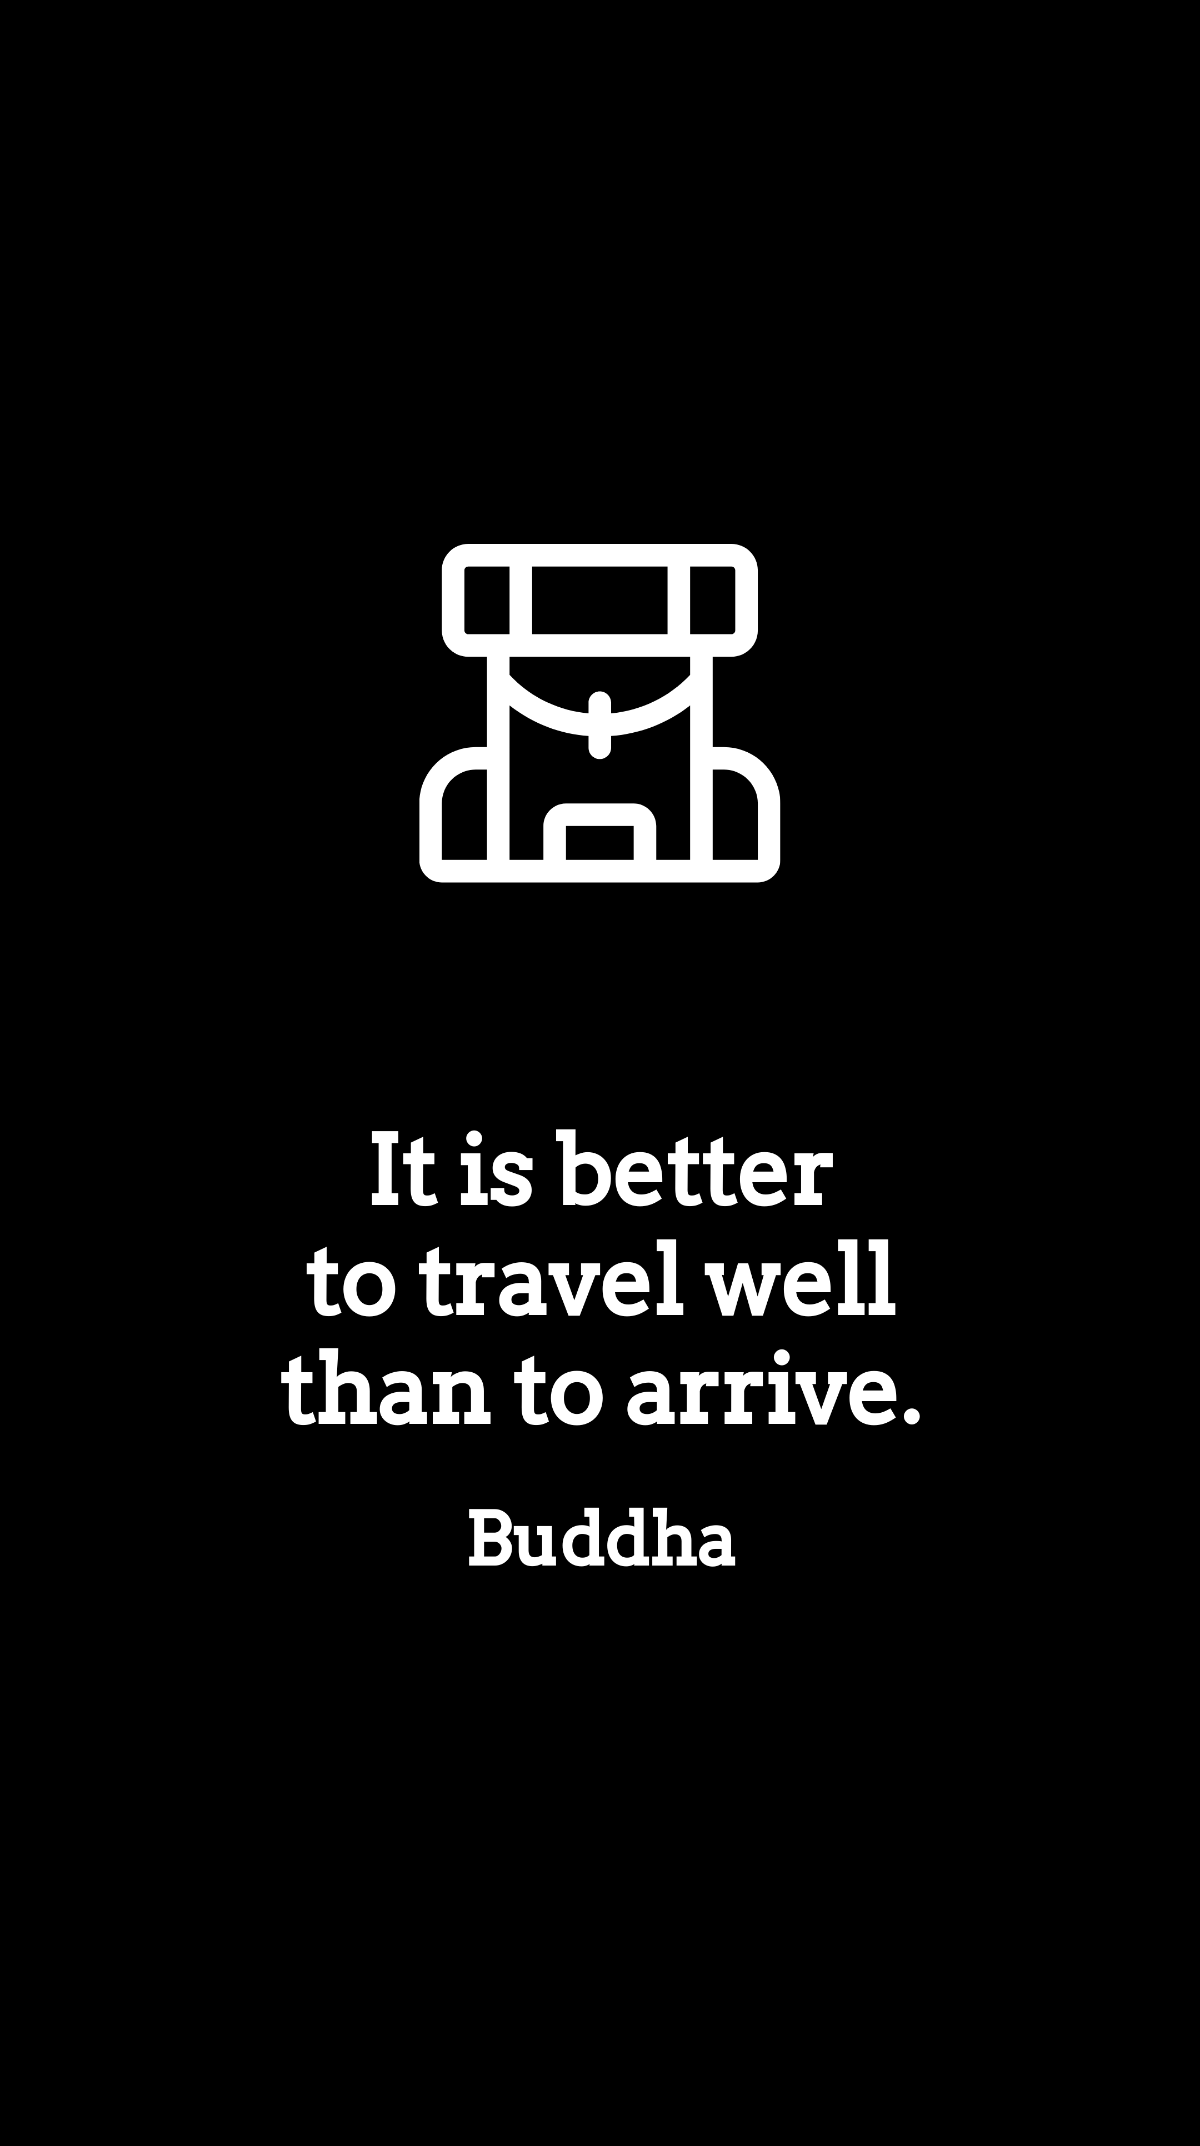 Buddha - It is better to travel well than to arrive. Template